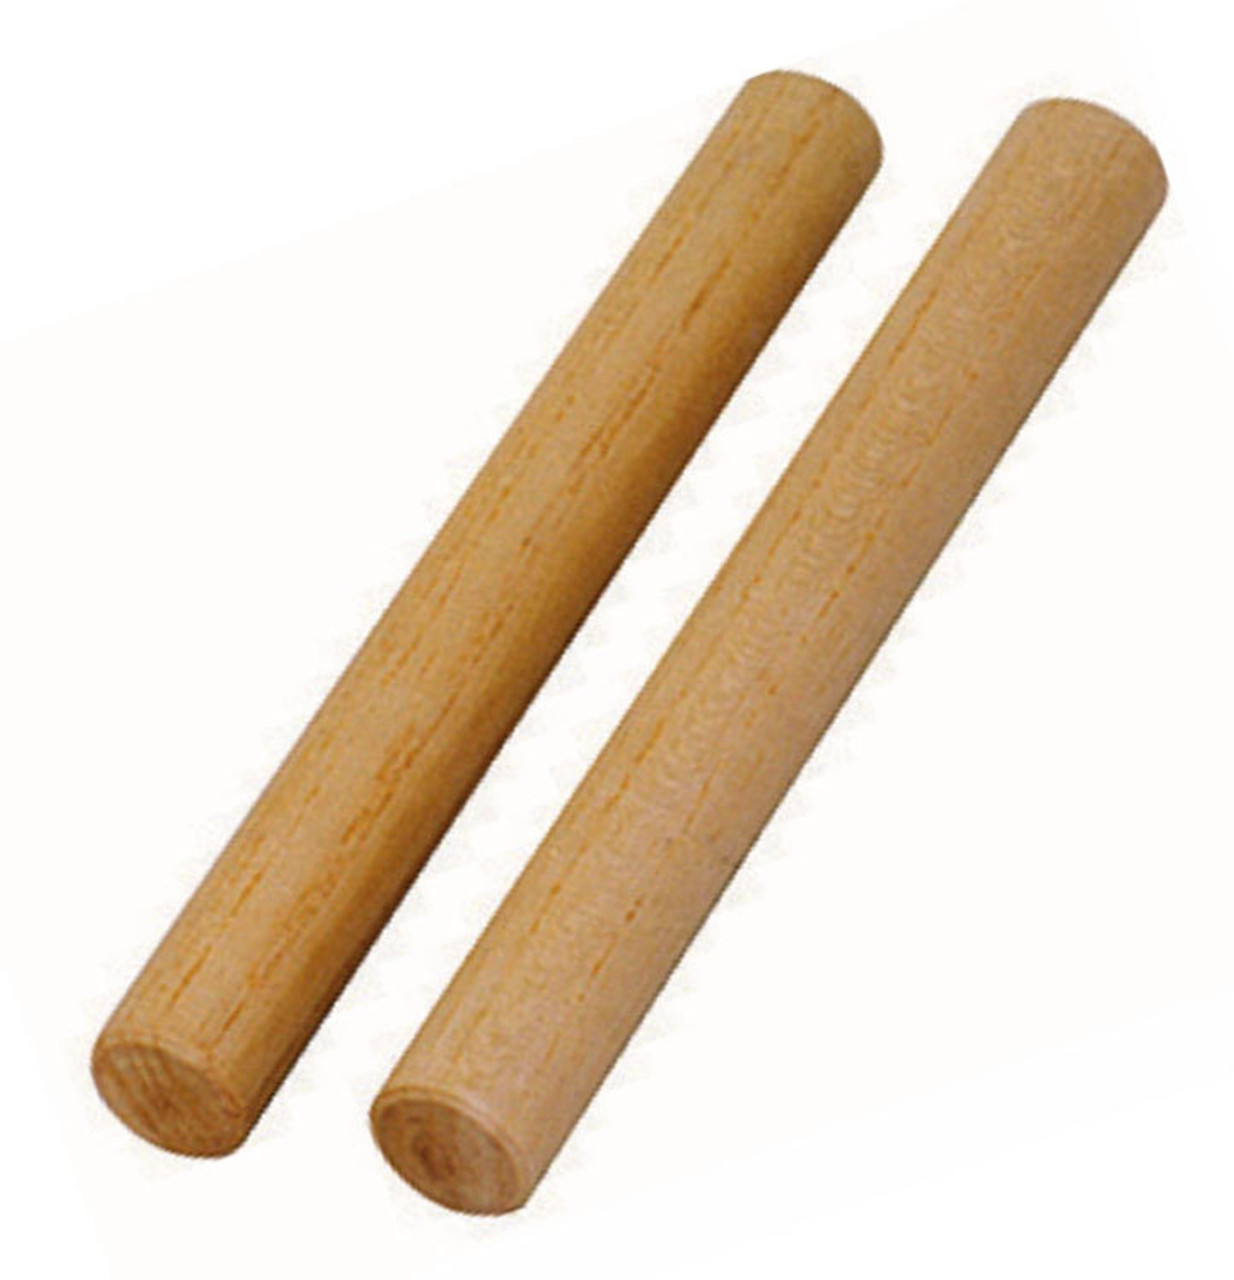 Opus Percussion Pilewood Claves (1 Pair)